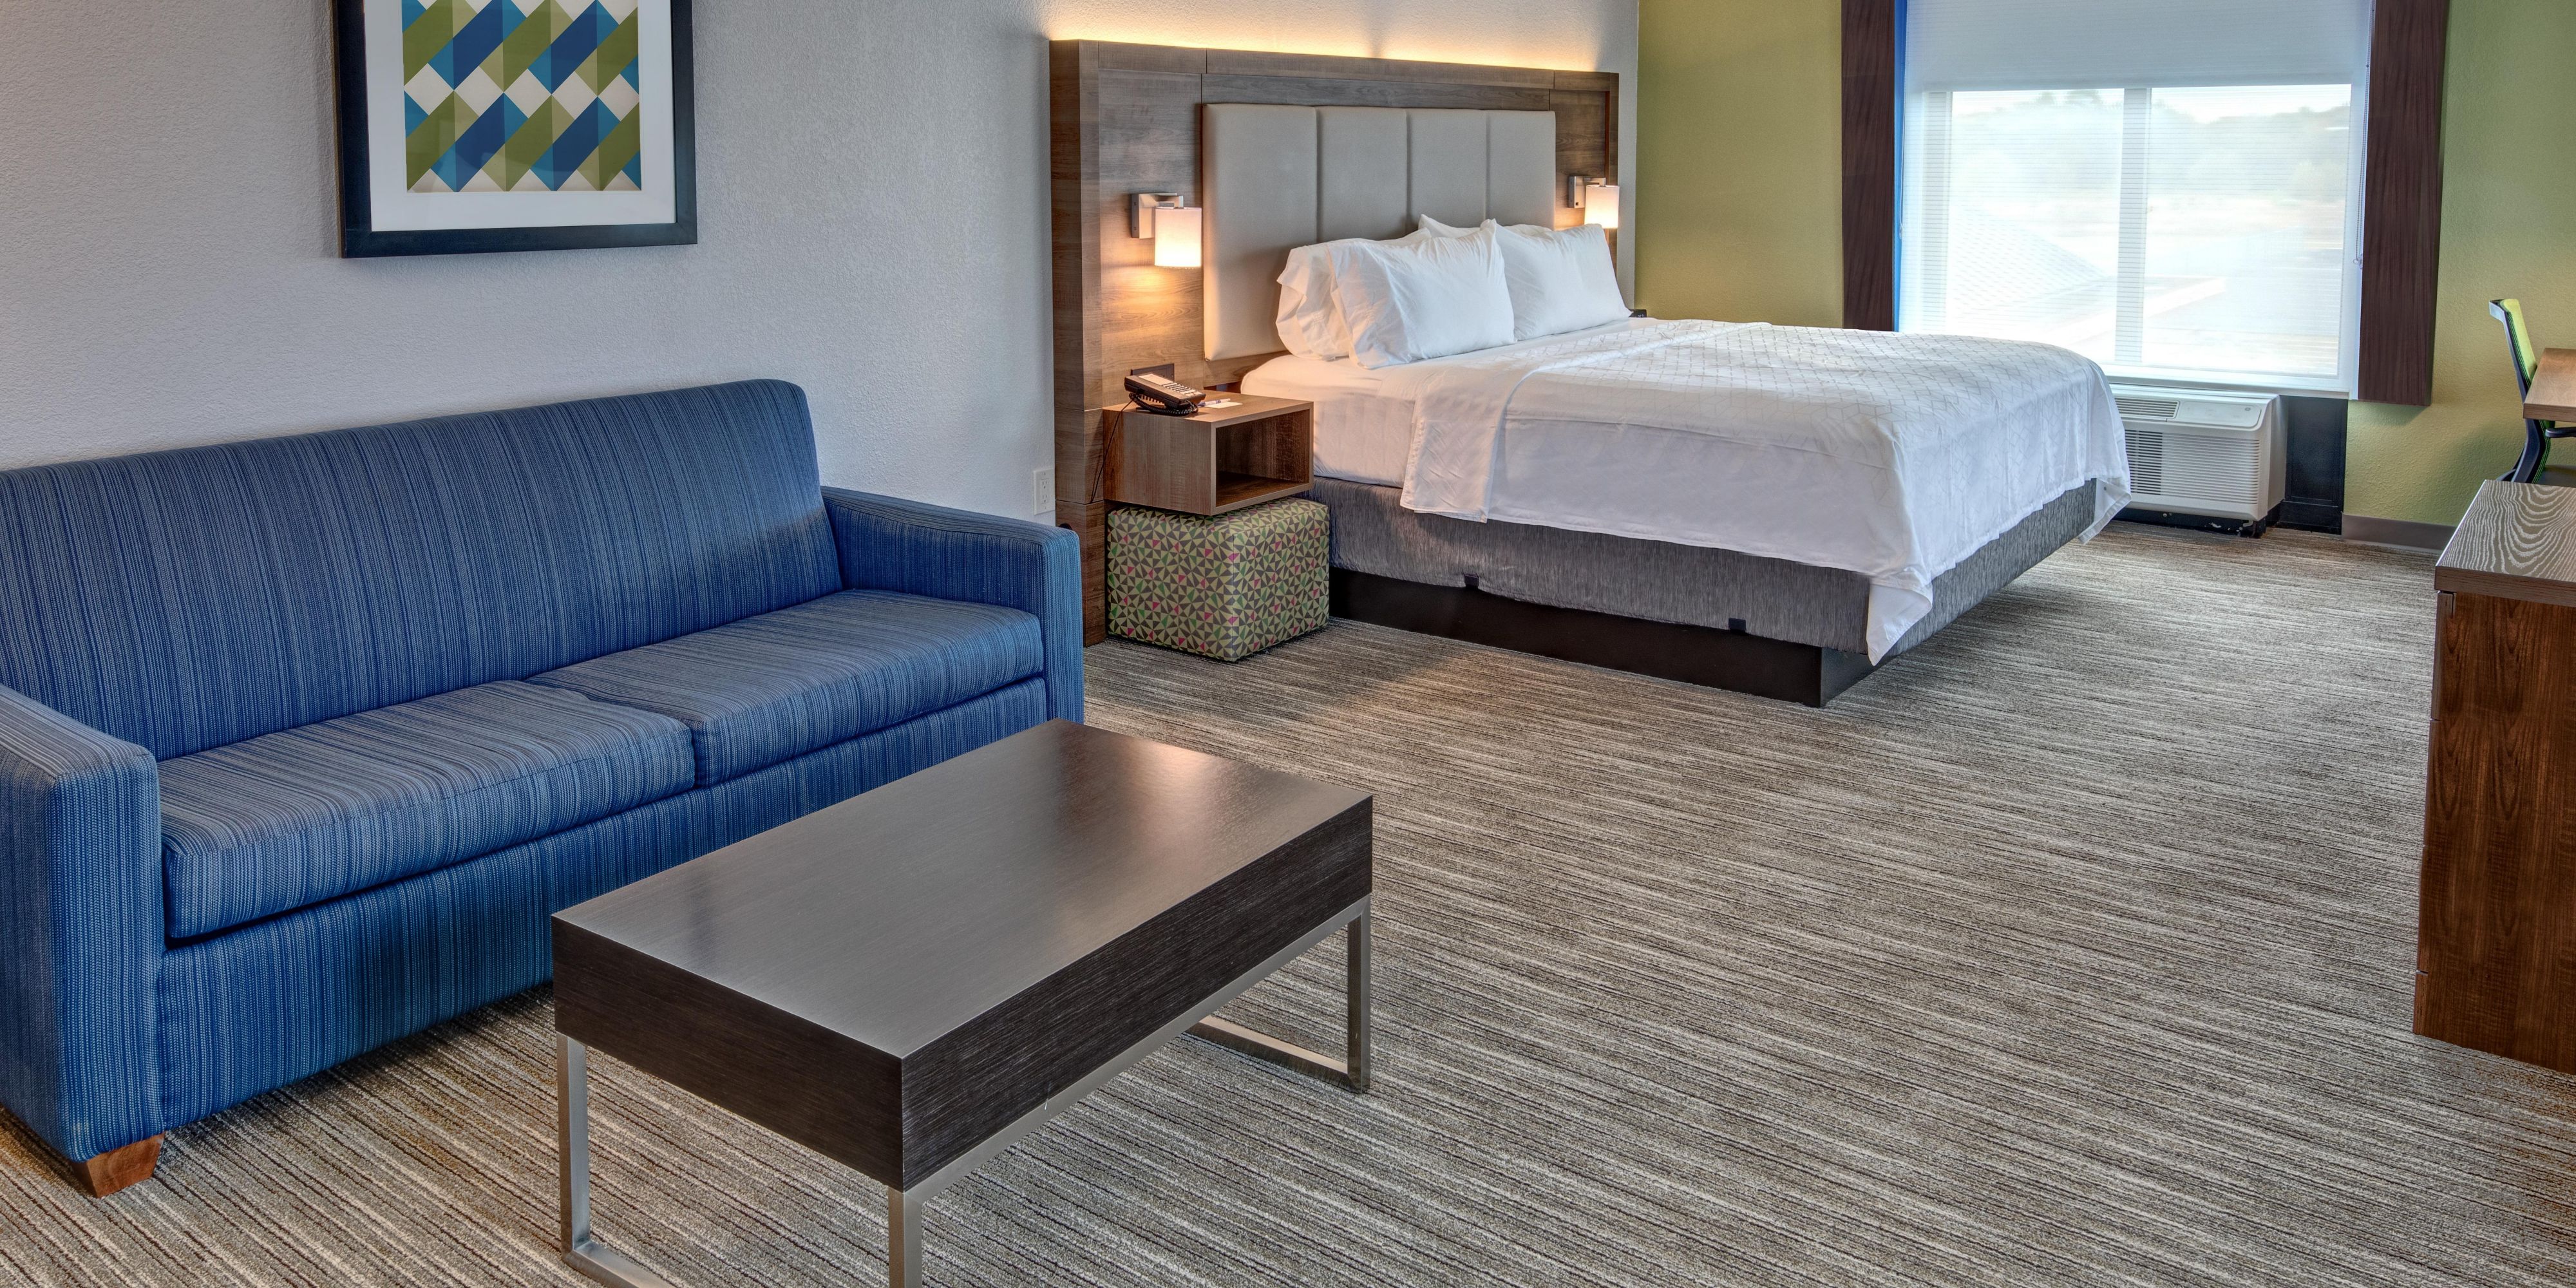 holiday-inn-express-and-suites-memphis-5847120764-2x1